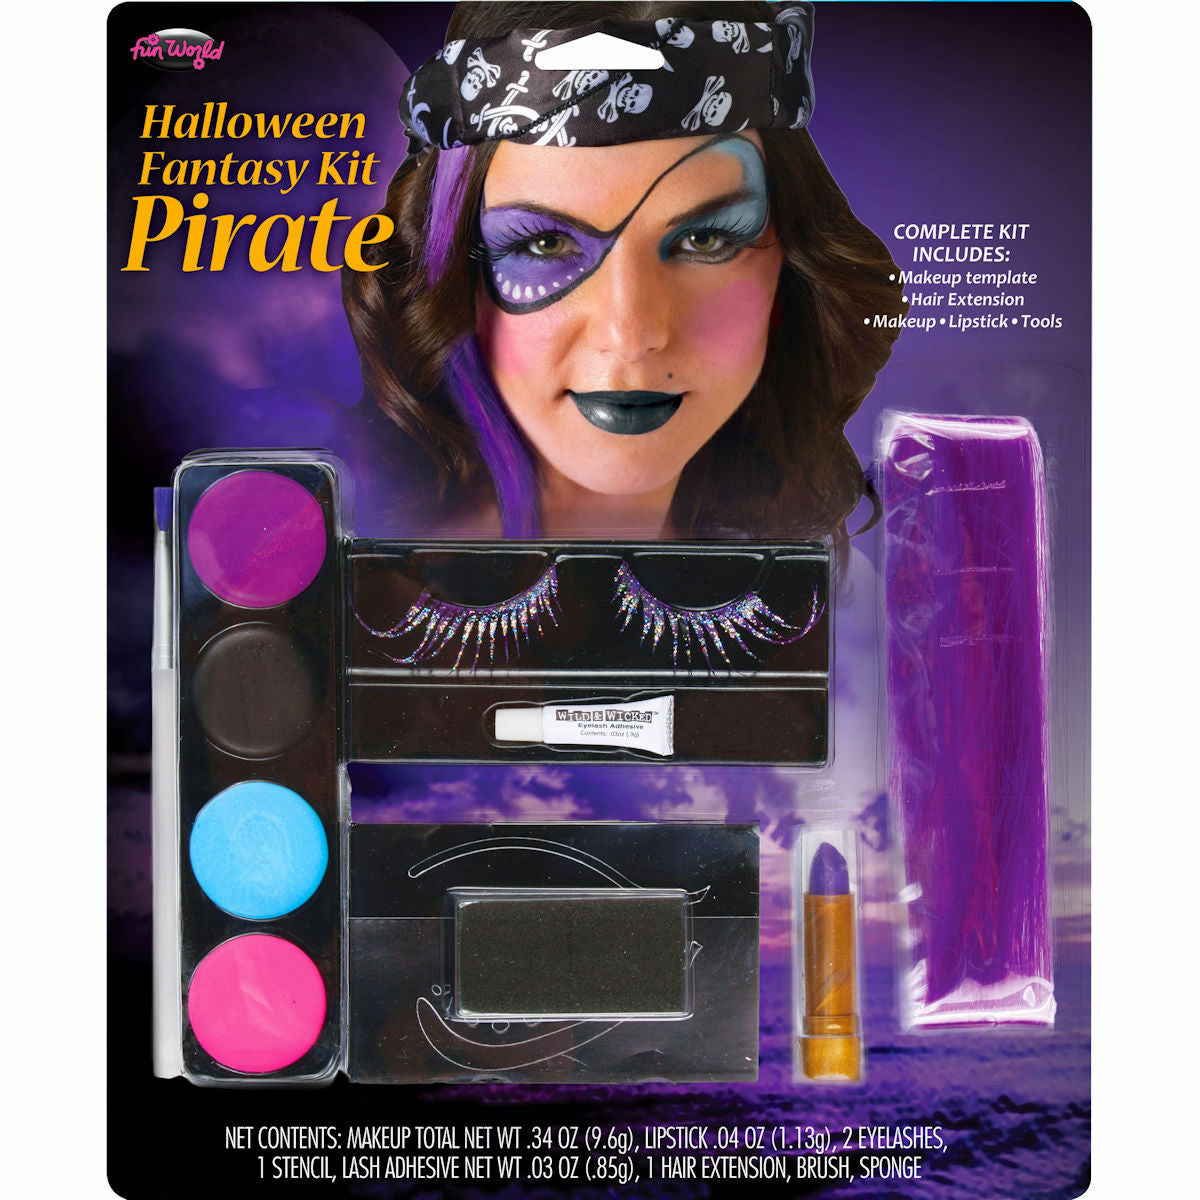 Pirate Fantasy Makeup Kit FX Kit Halloween Costume Accessory with Eyelashes